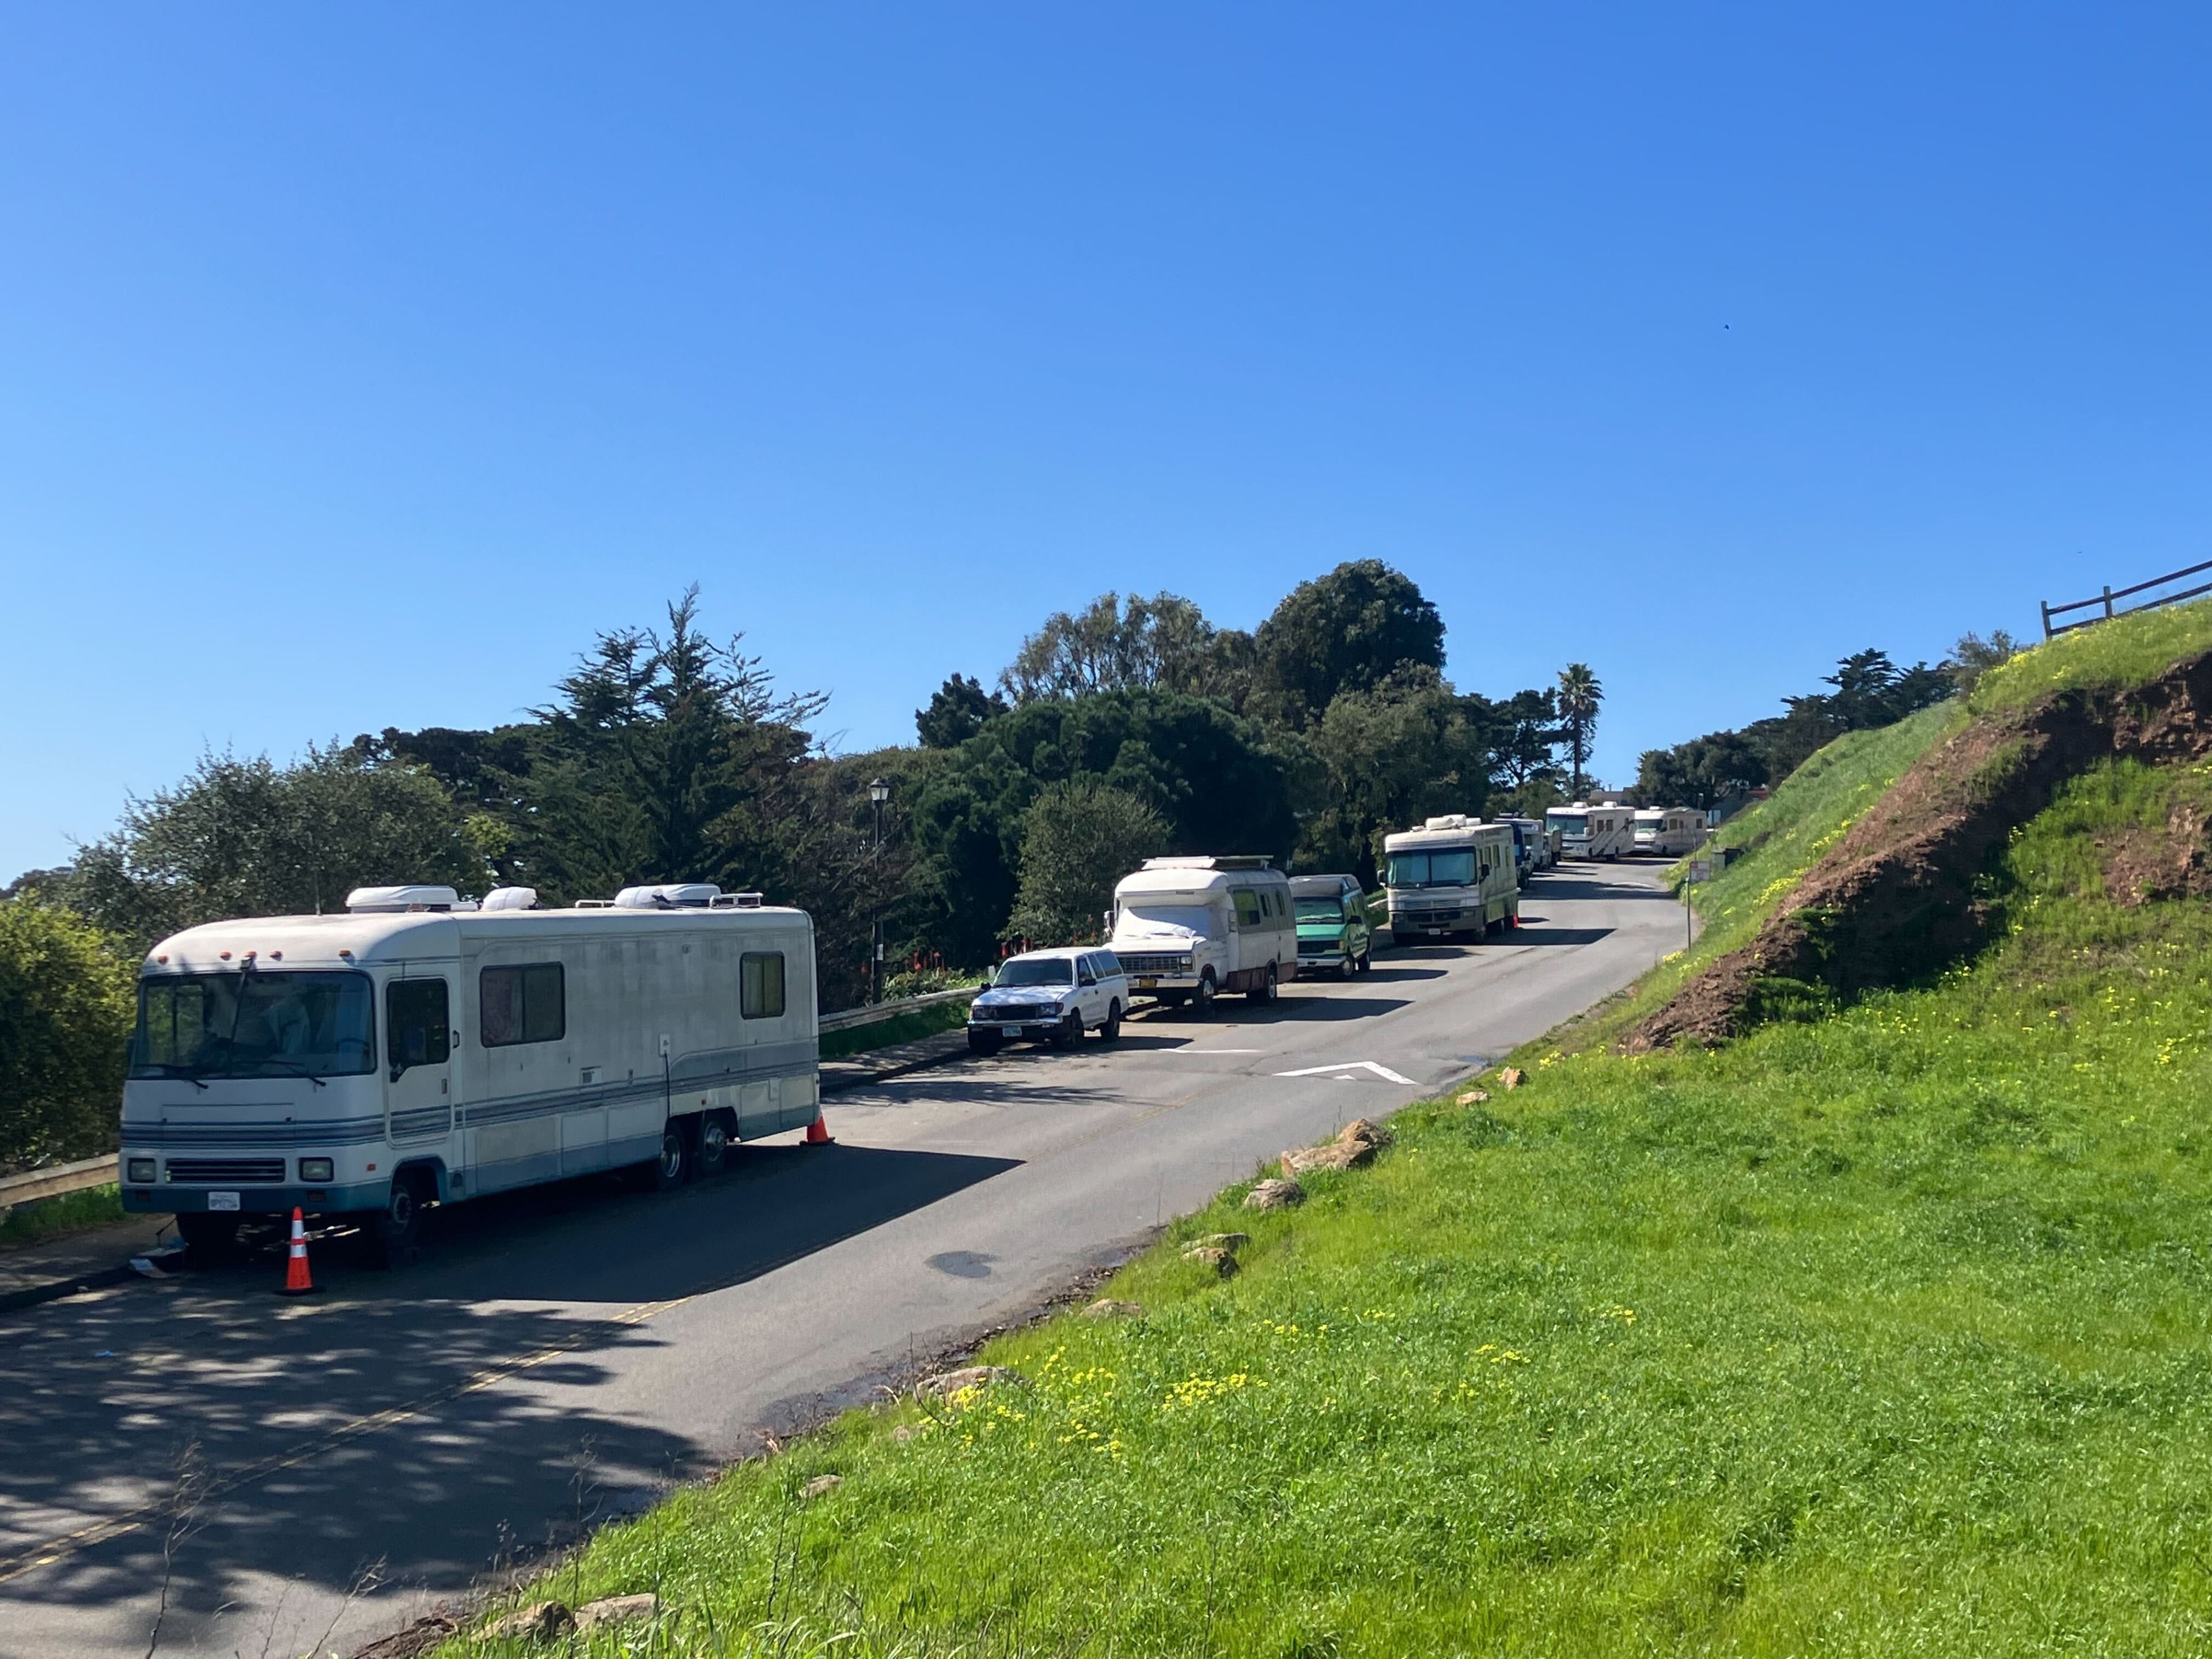 Several RVs parked along a roadside with grass and trees under a clear blue sky.